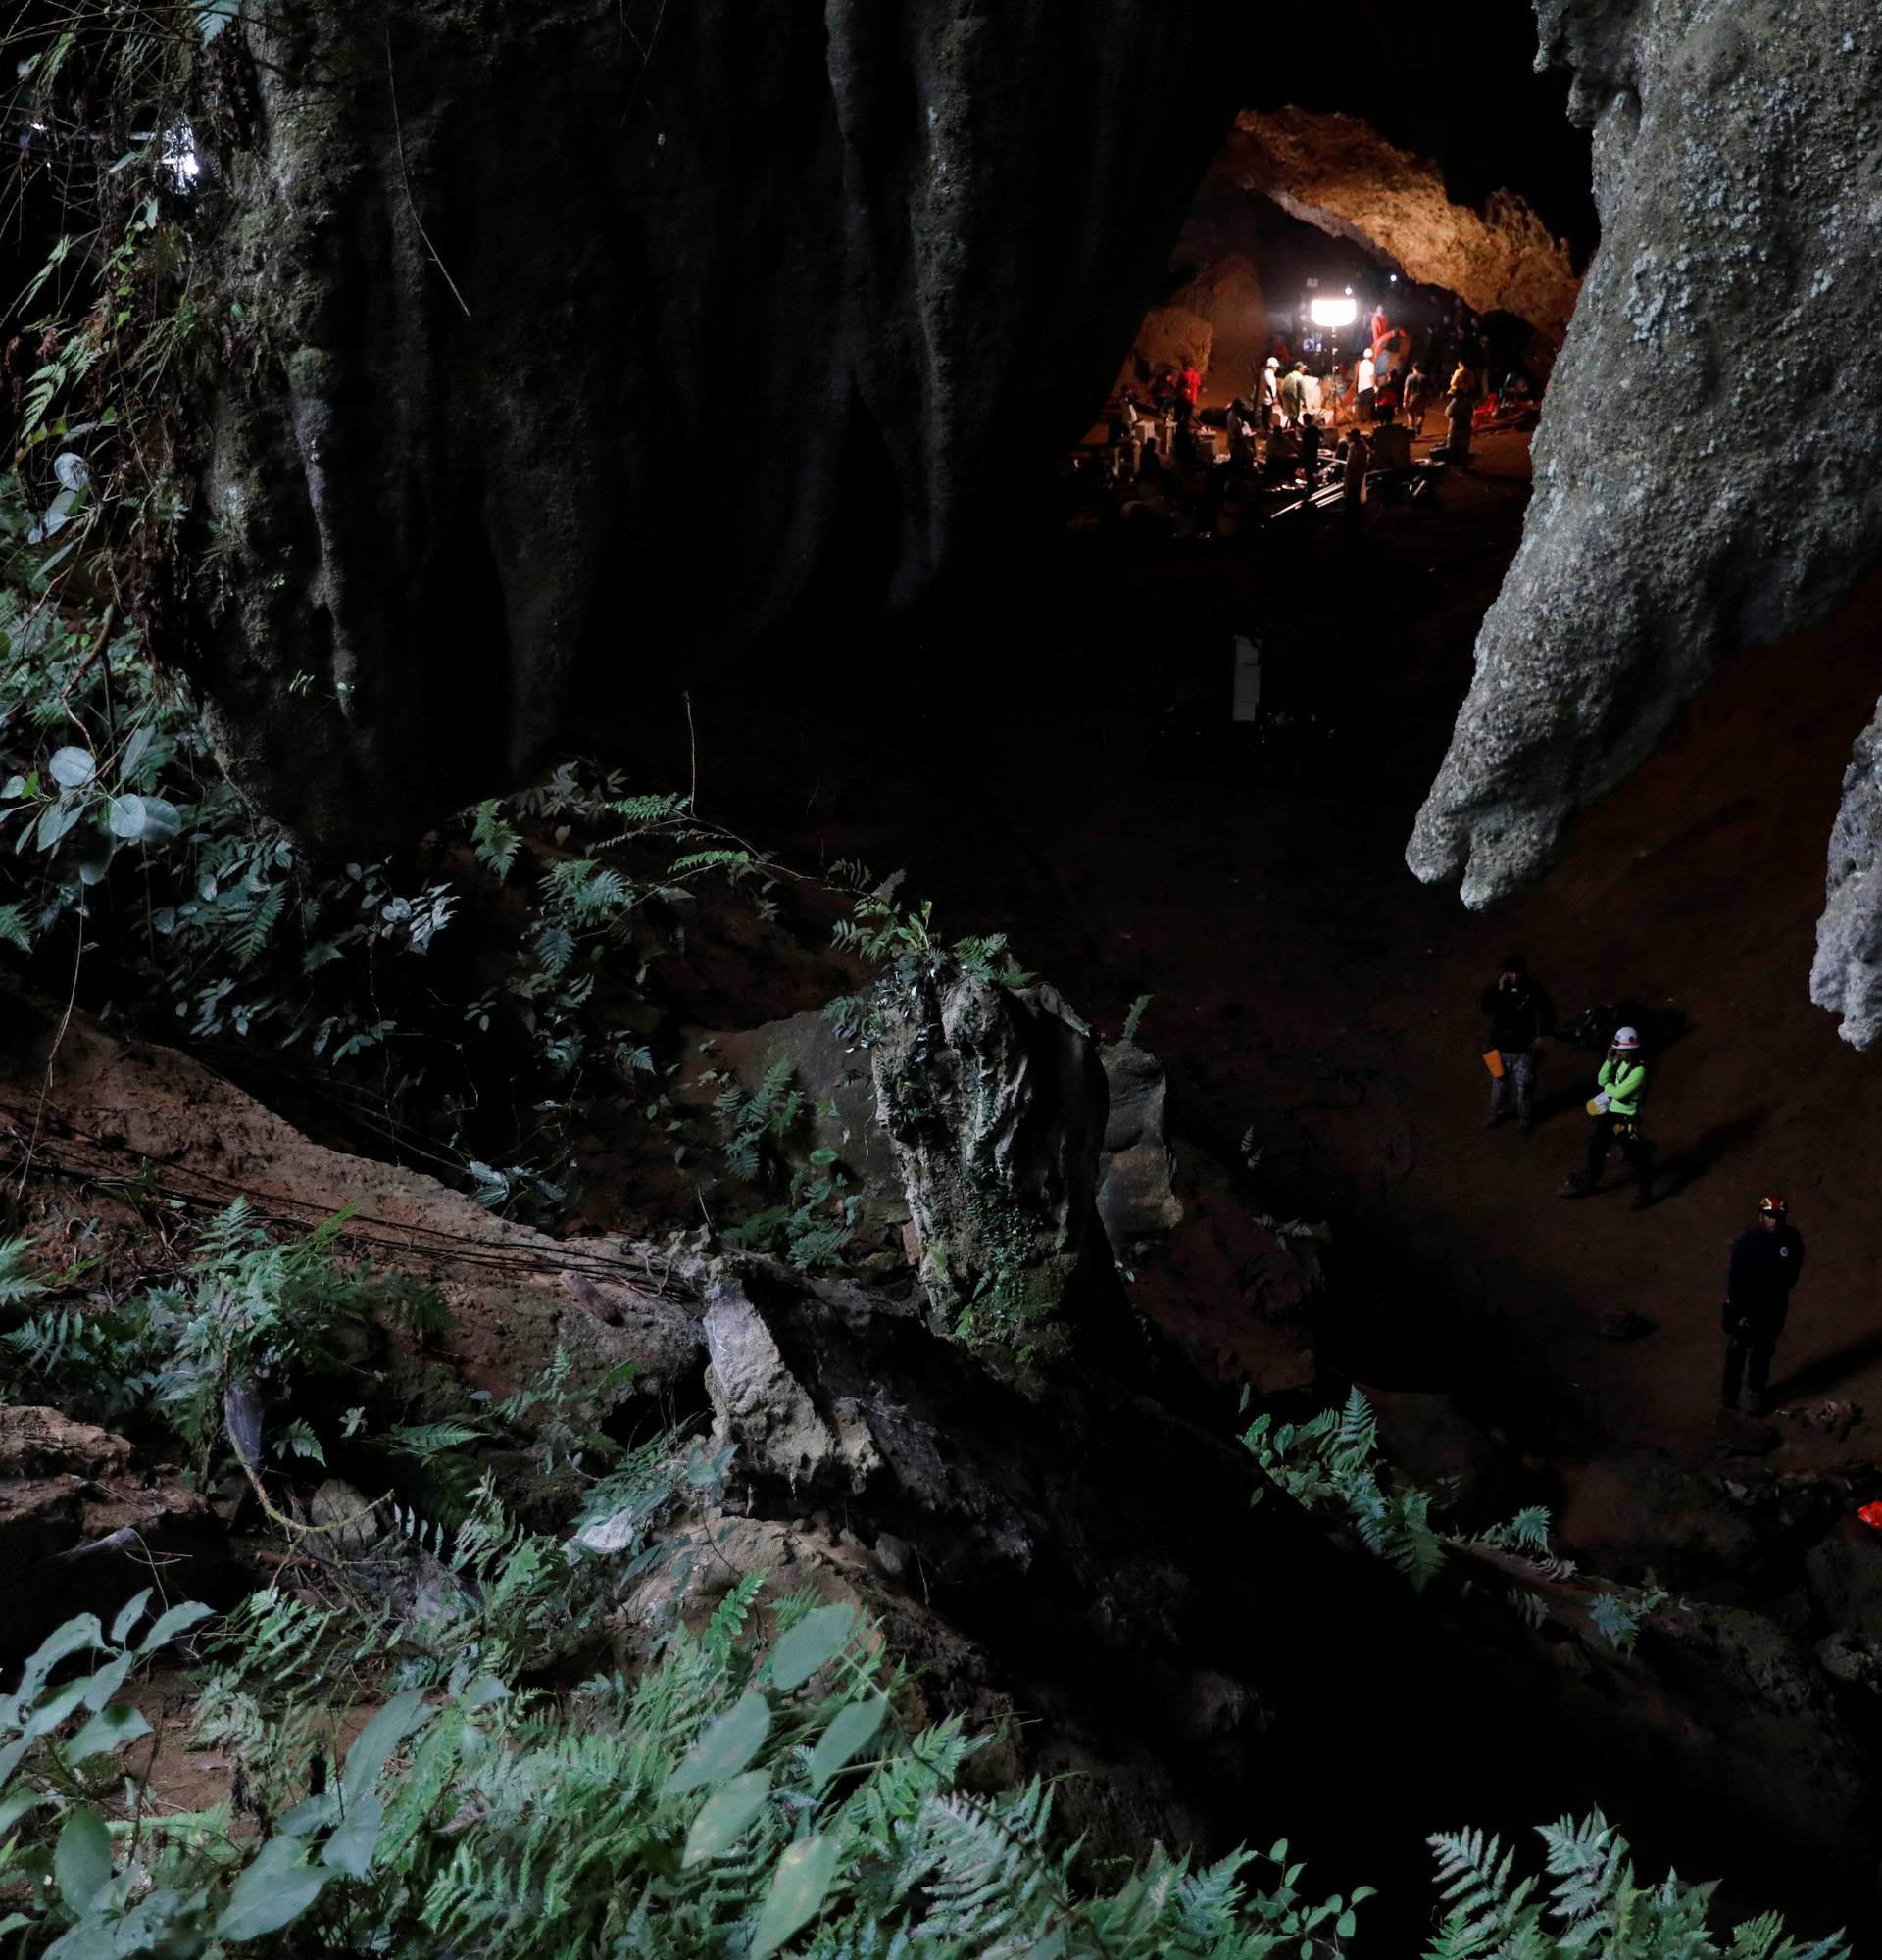 Rescue workers are seen in Tham Luang caves during a search for 12 members of an under-16 soccer team and their coach, in the northern province of Chiang Rai